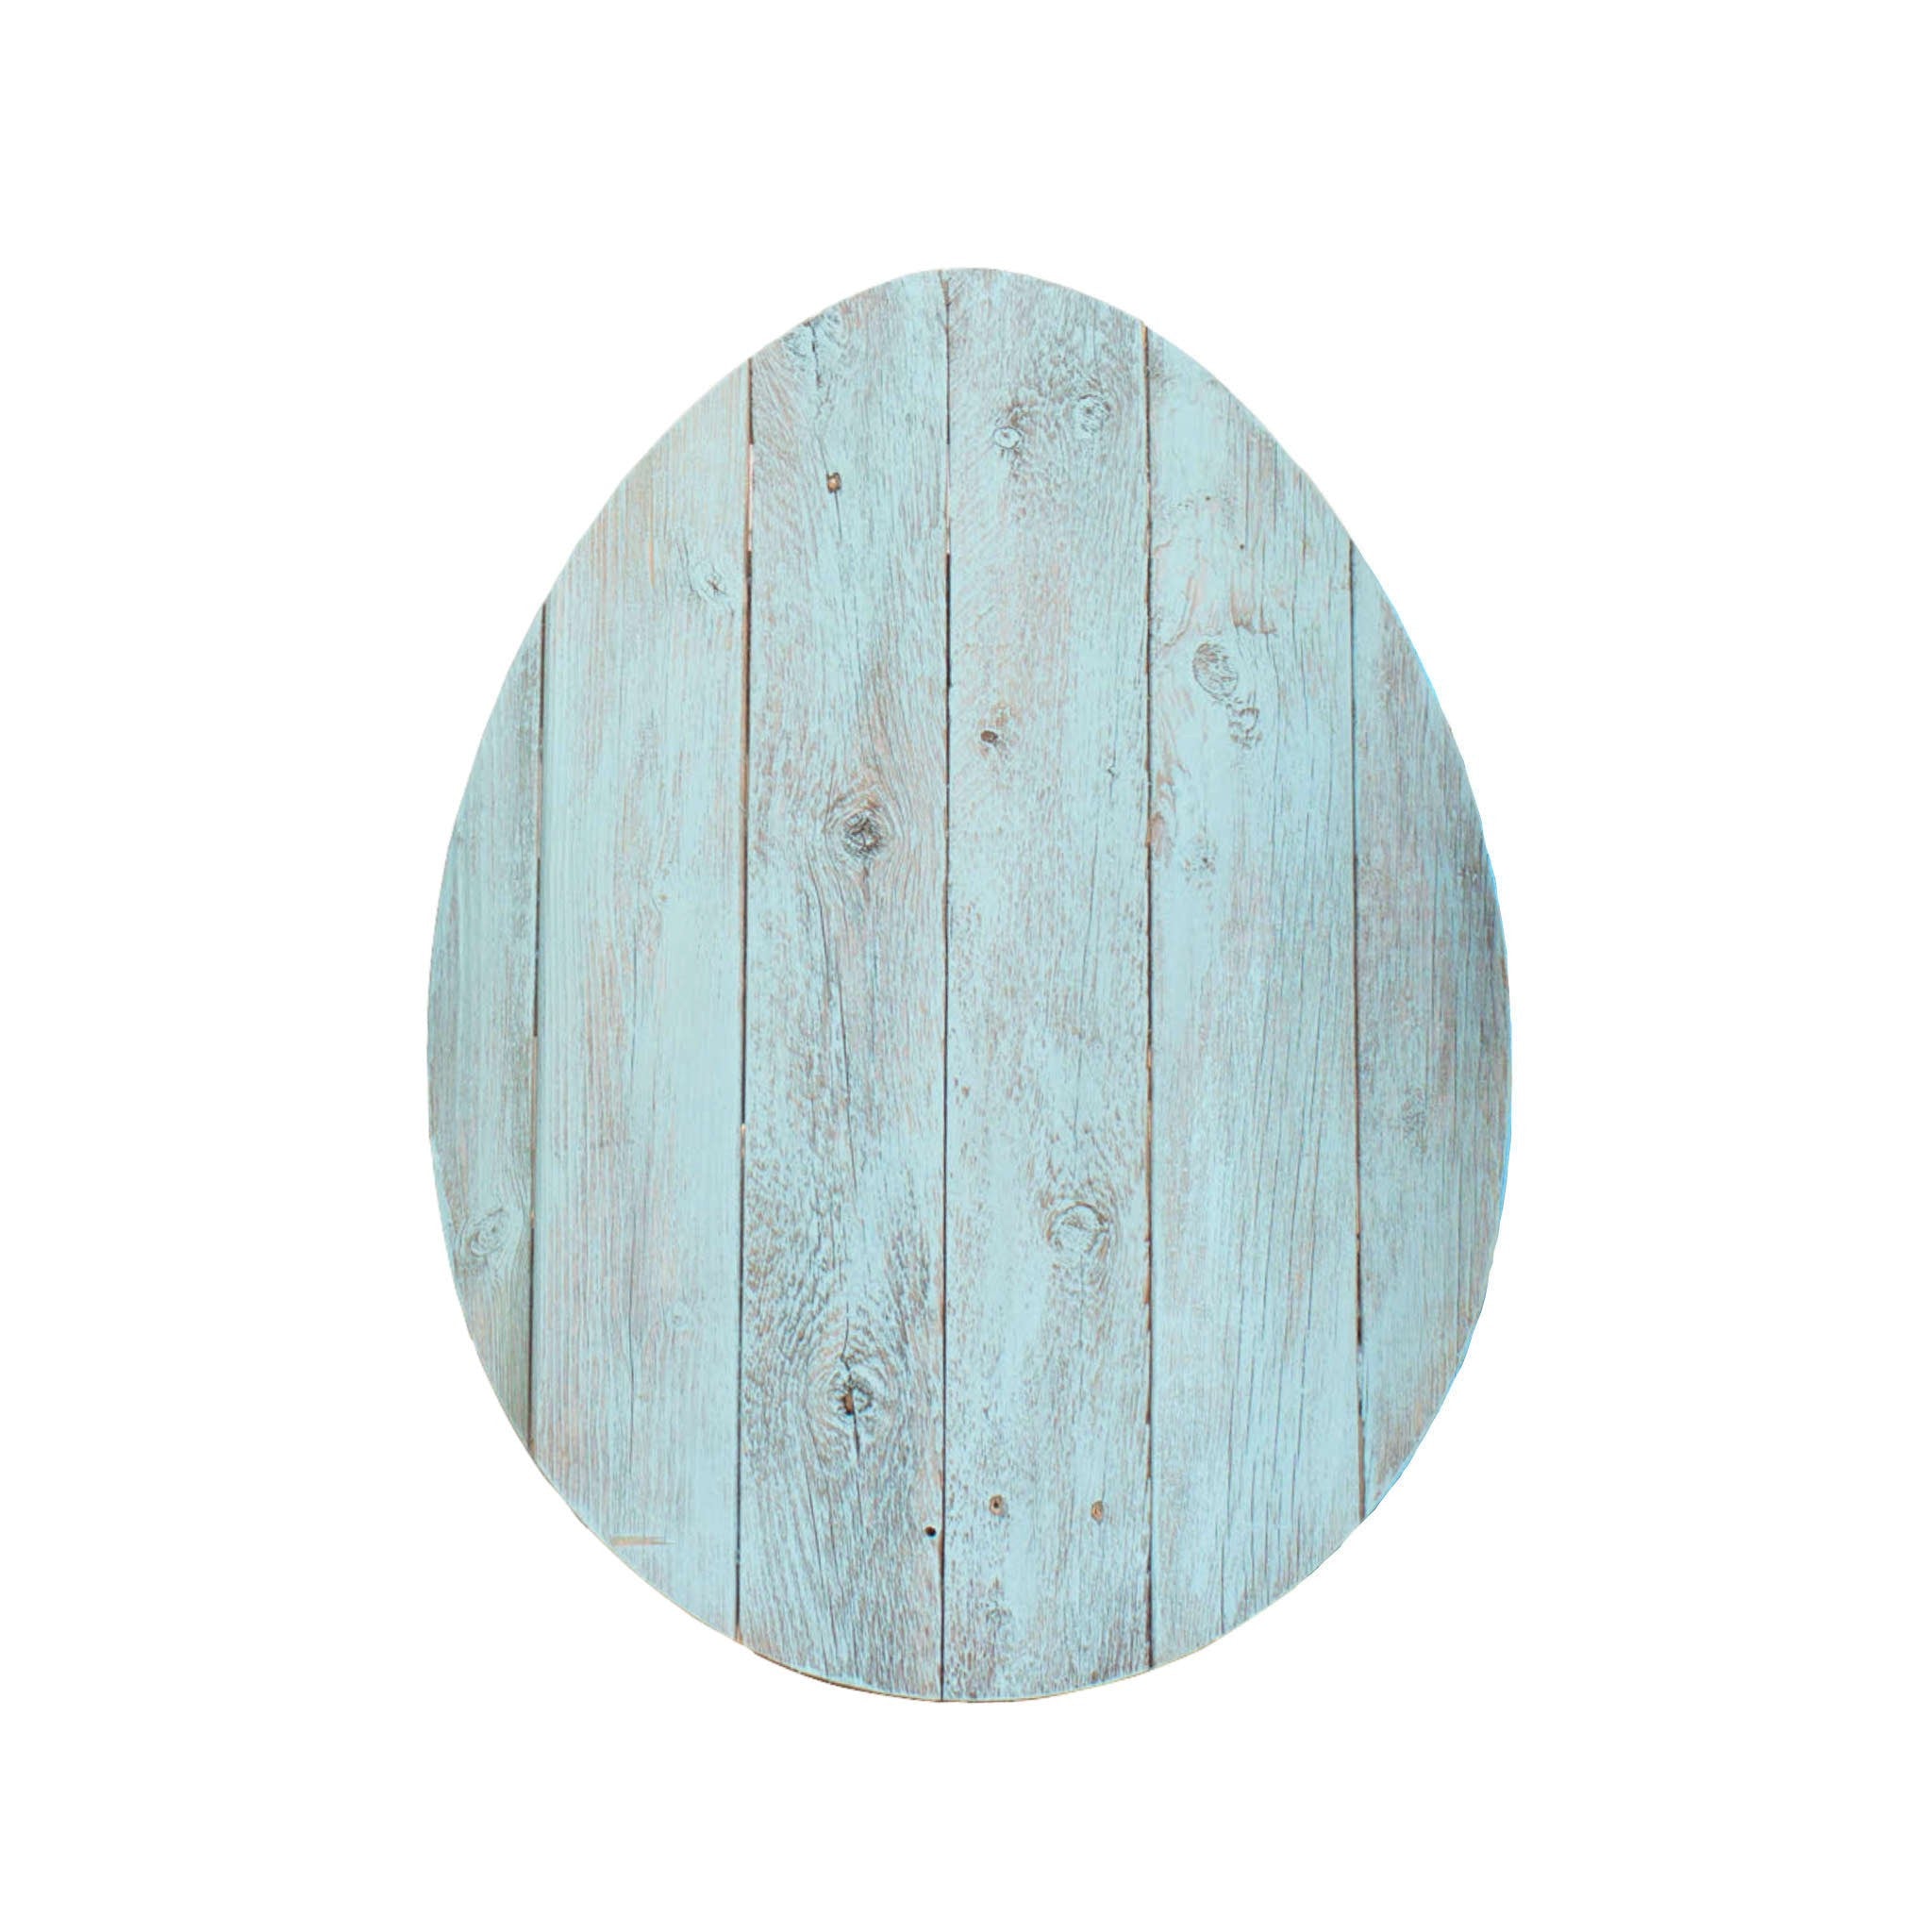 18" Rustic Farmhouse Turquoise Wooden Large Egg